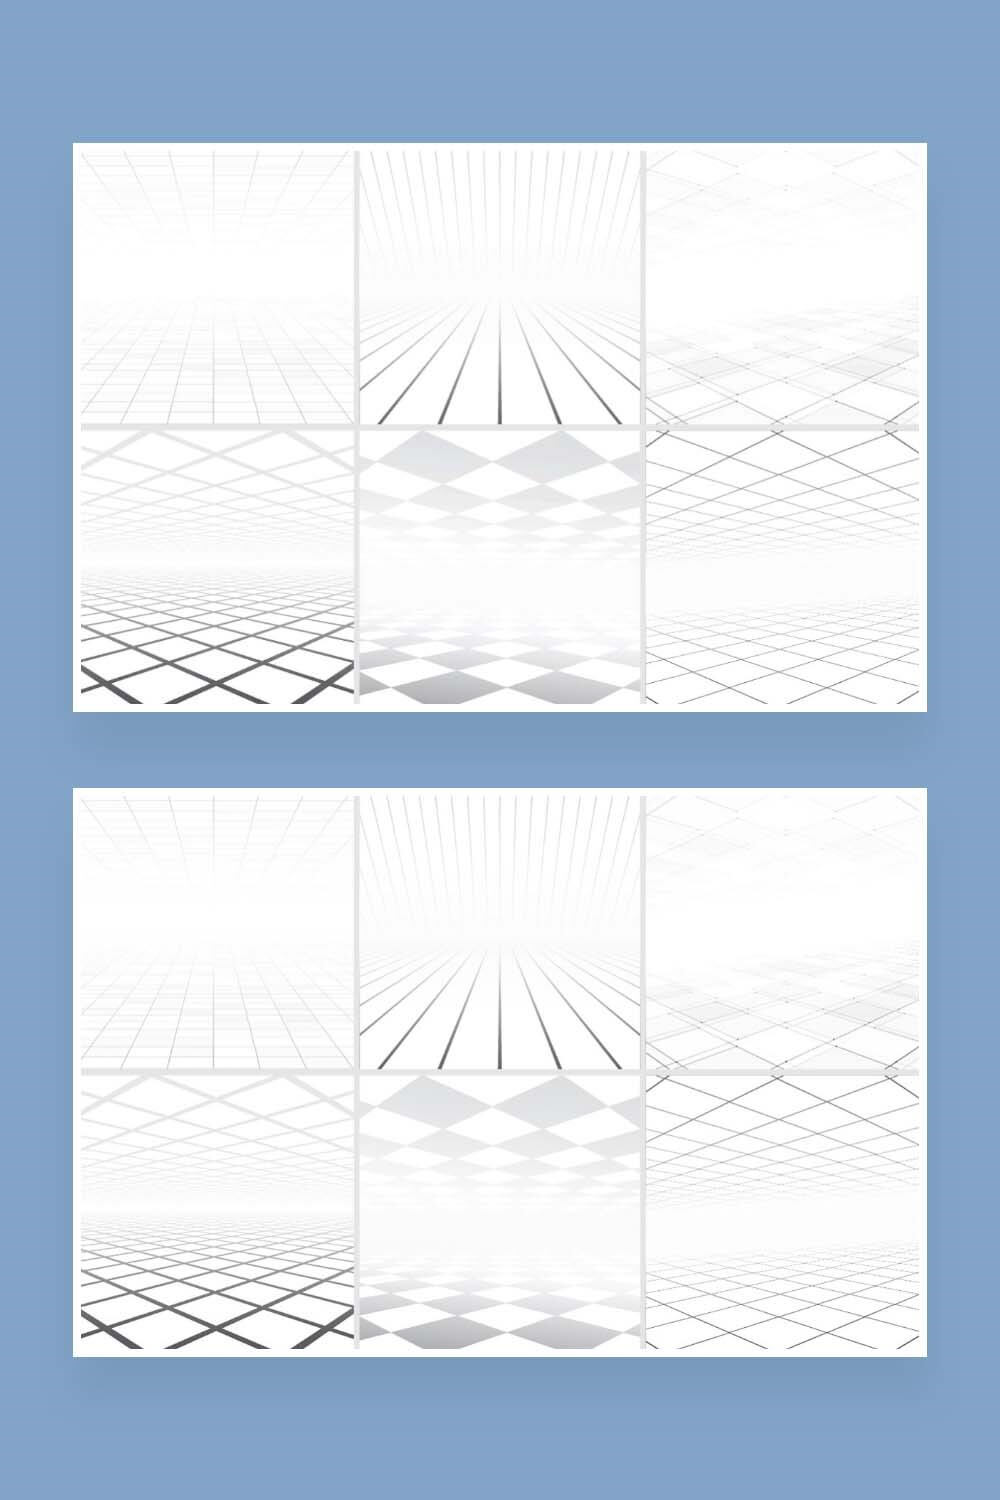 Two pictures with white abstract backgrounds with a blue outline for Pinterest.